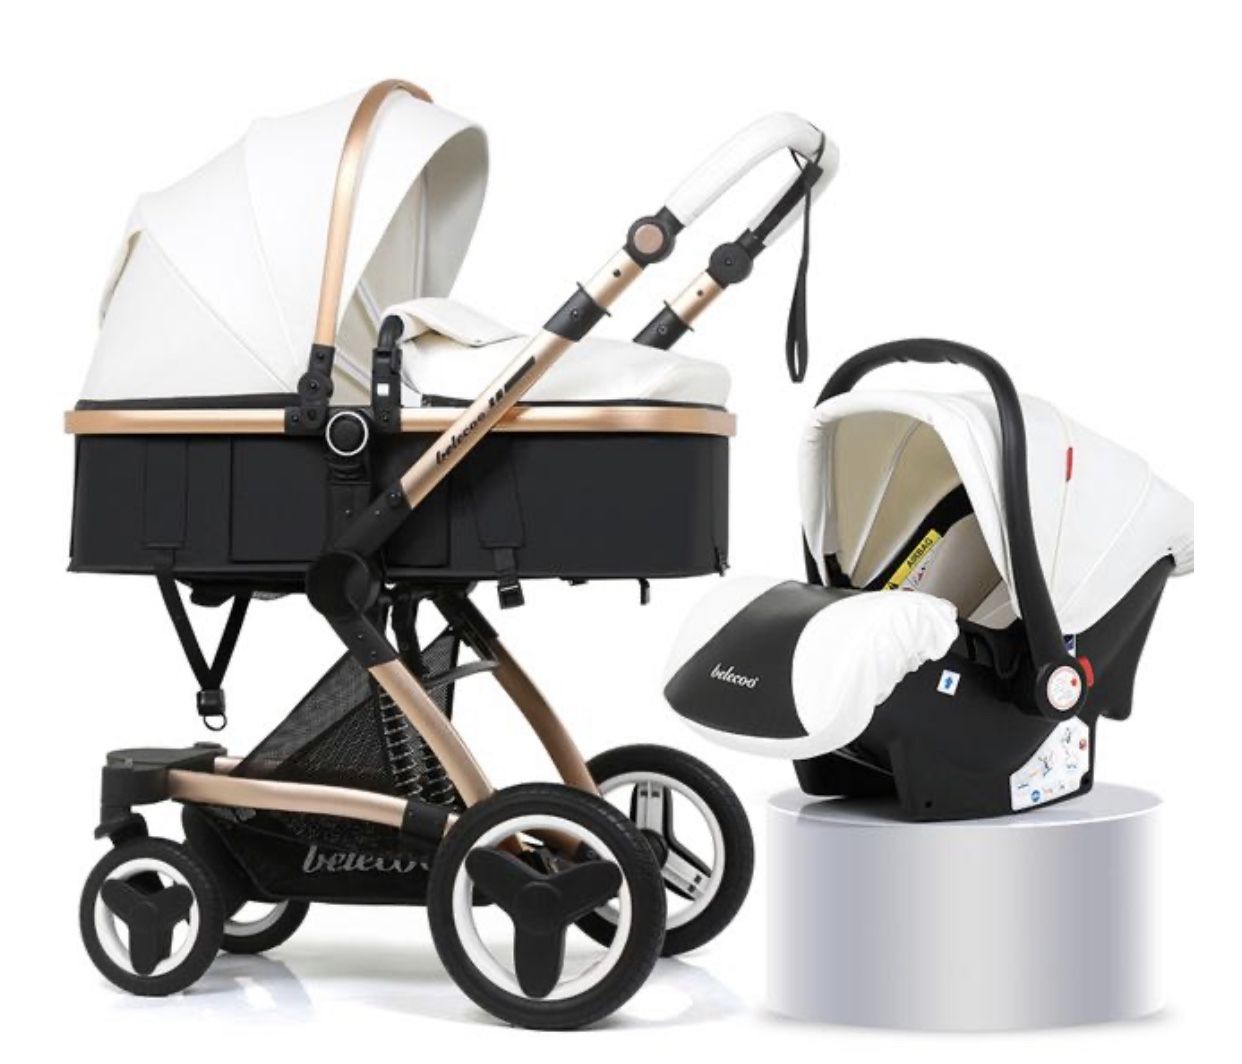 Belecoo Brand Luxury Baby Stroller 3 in 1 Travel System With Infant Seat